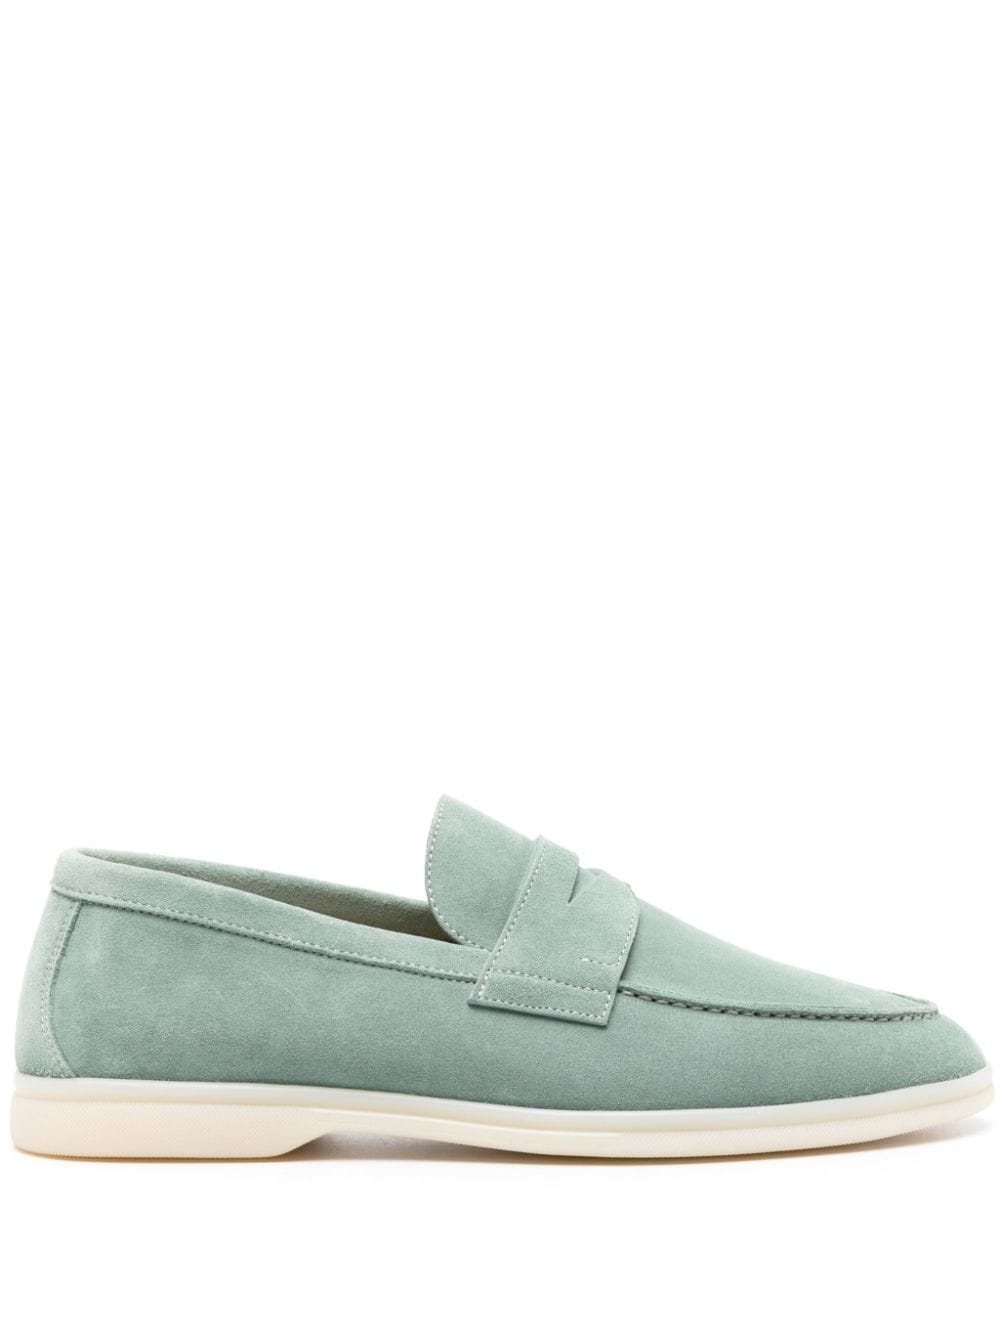 Scarosso Luciano suede loafers - Green von Scarosso